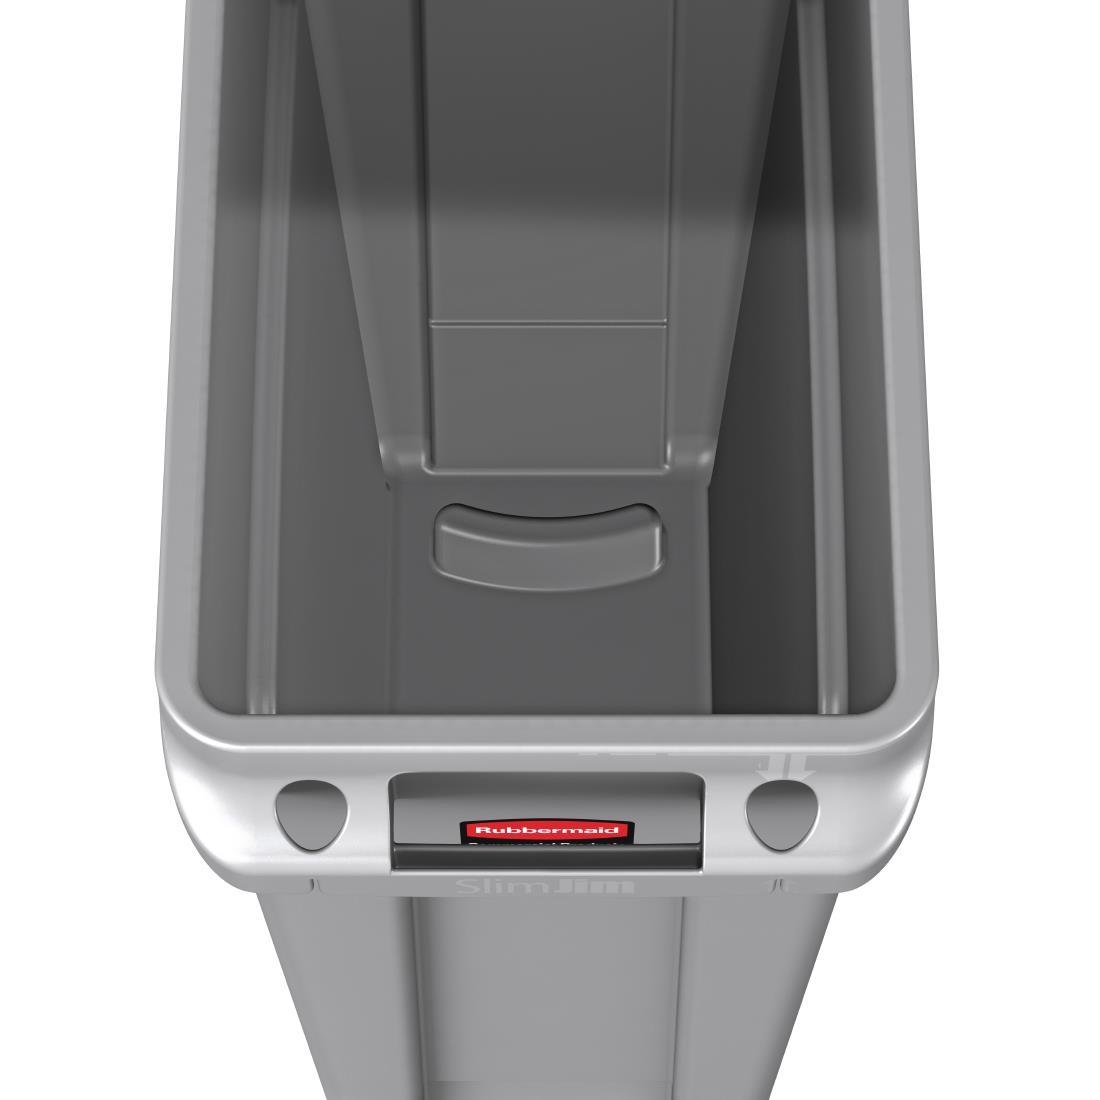 Rubbermaid Slim Jim Container With Venting Channels Grey 60Ltr - F603  - 11